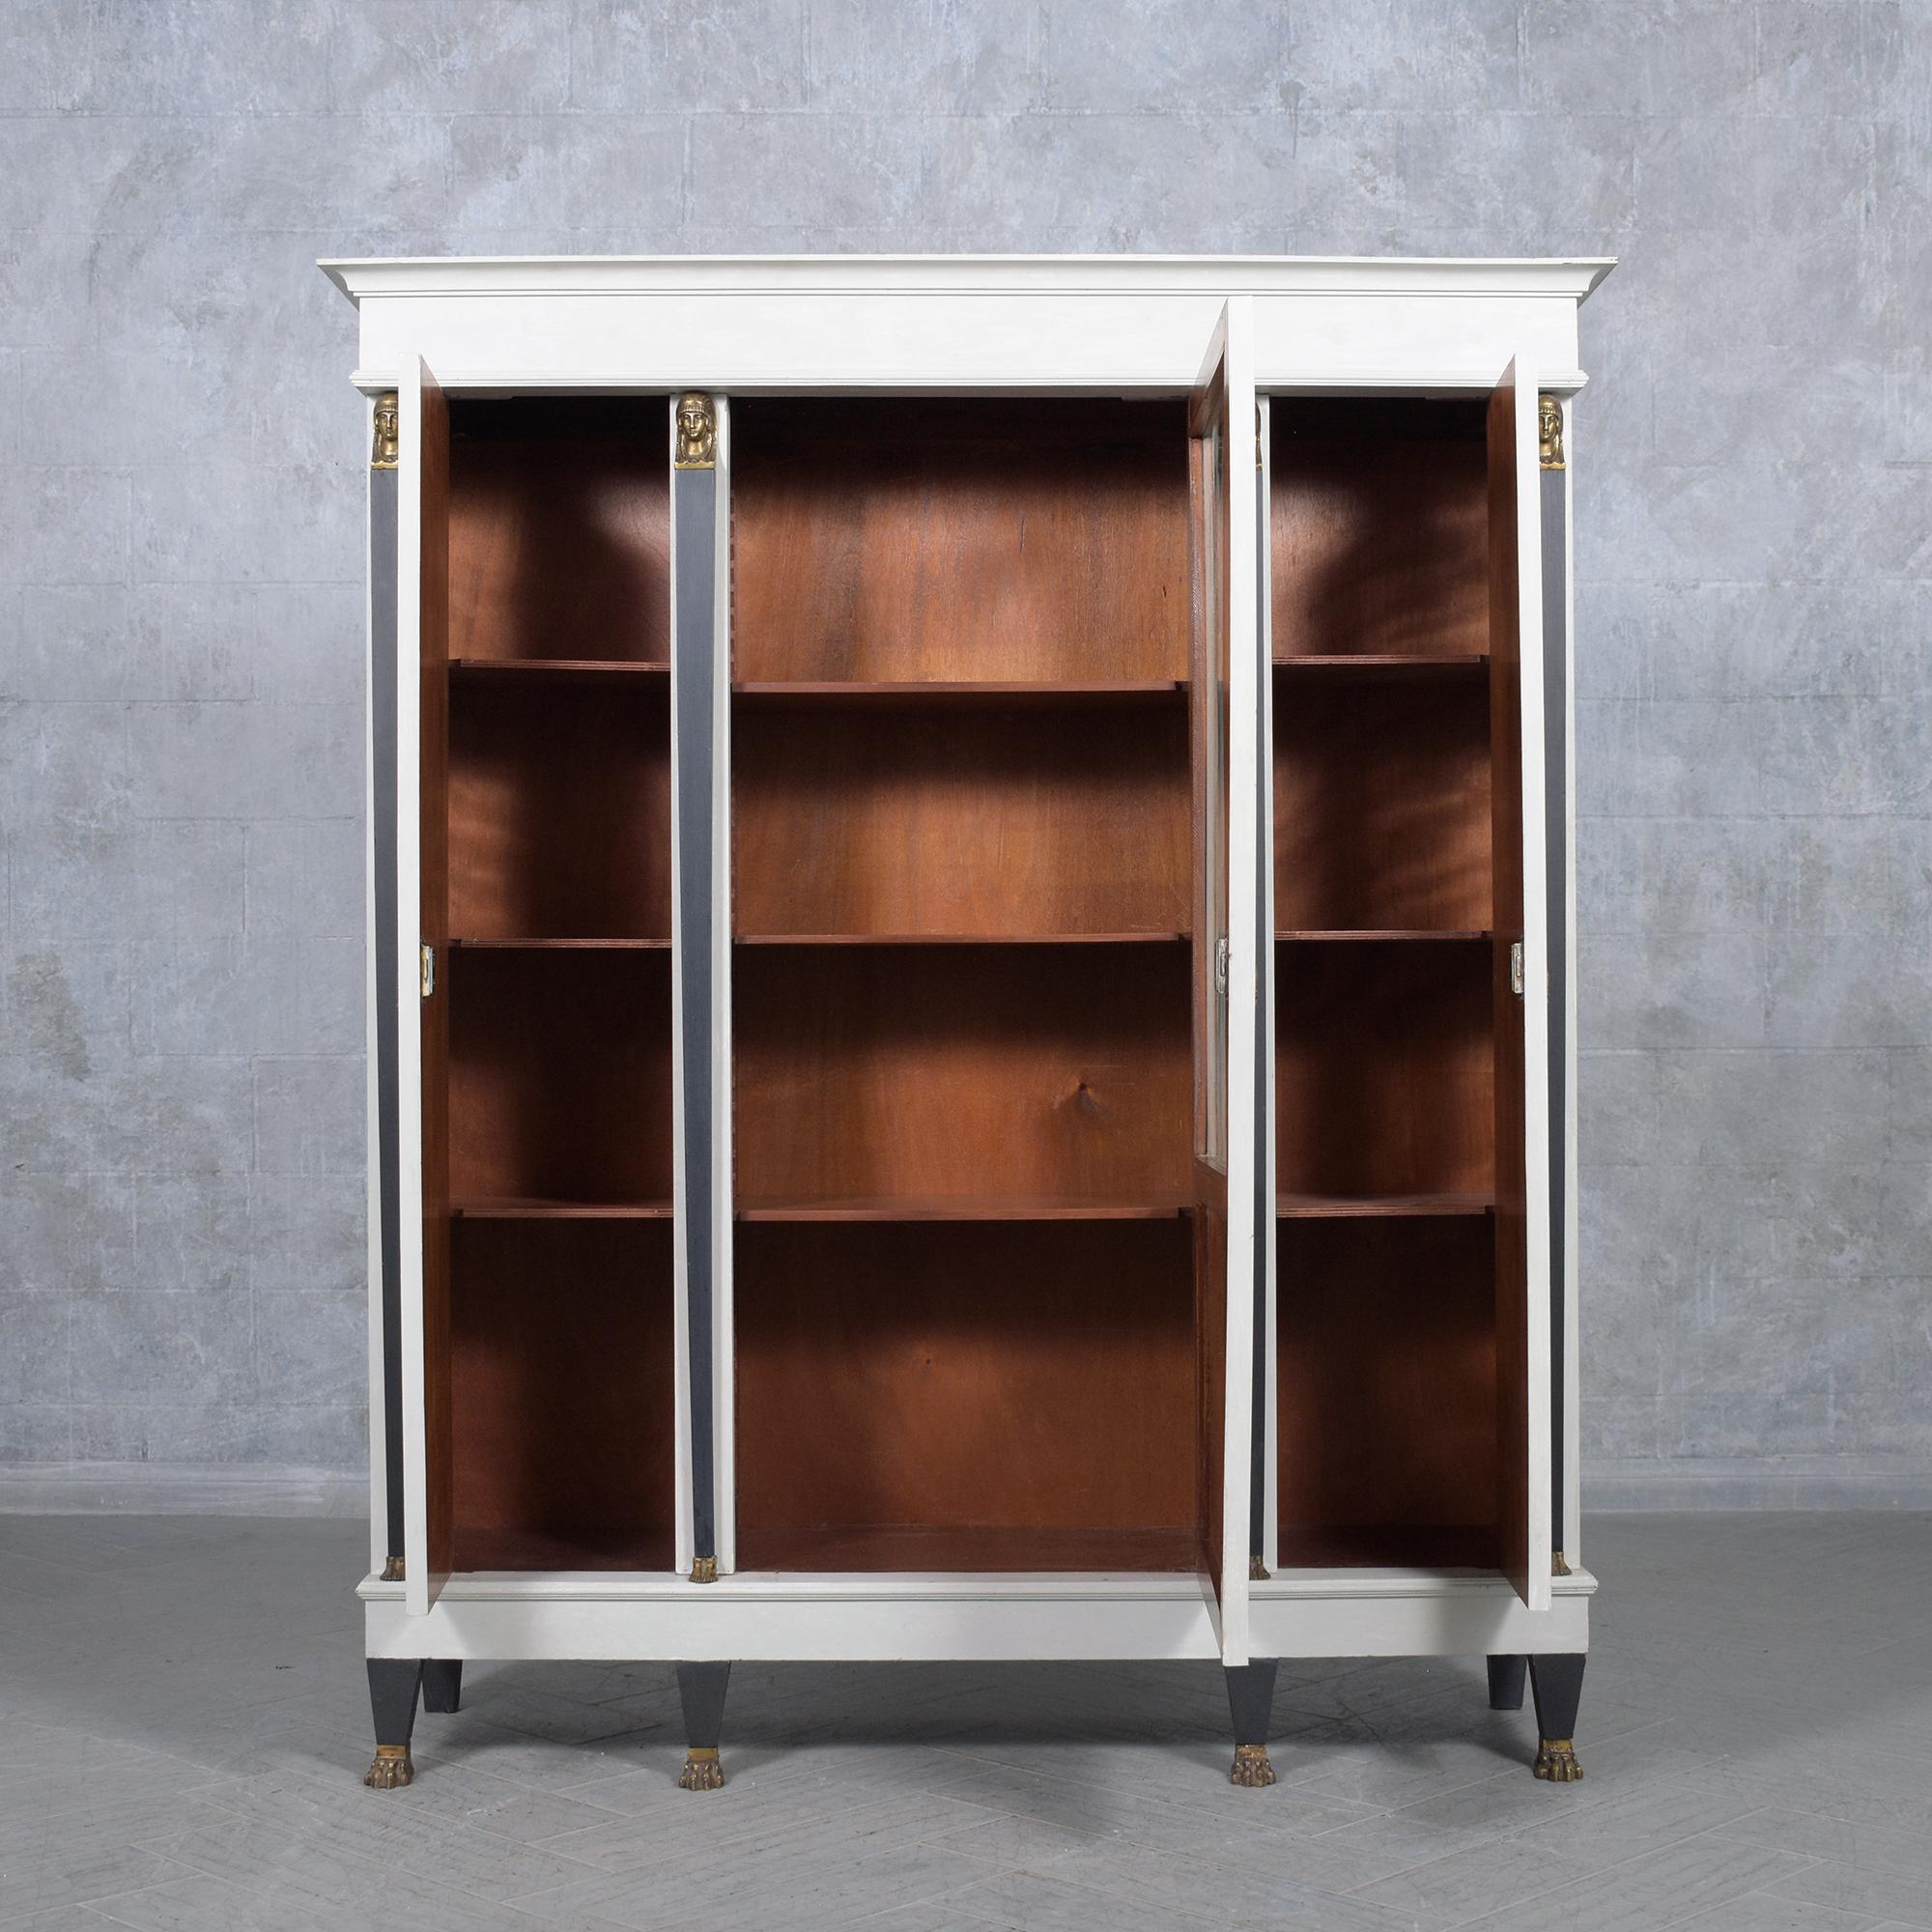 French Empire Bookcase: A Symphony of Mahogany, Brass, and Glass Elegance 1